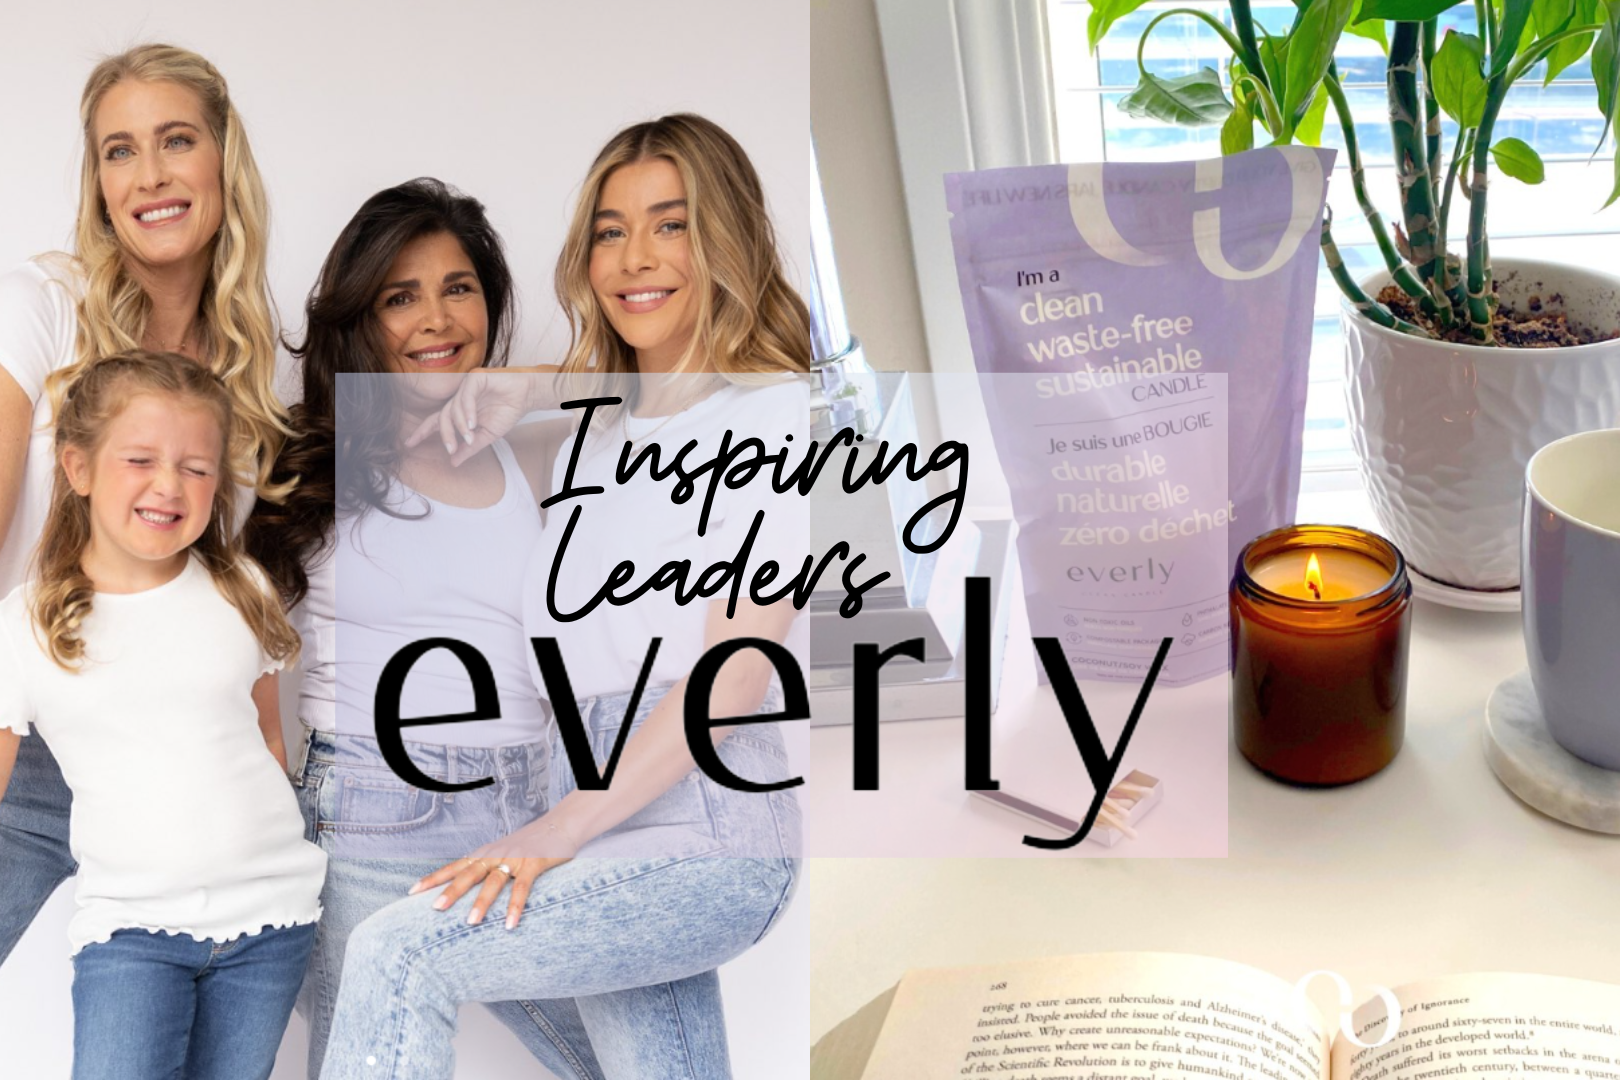 Alejandra and Charo of Everly the mom and daughter duo on a mission to clean up the candle industry